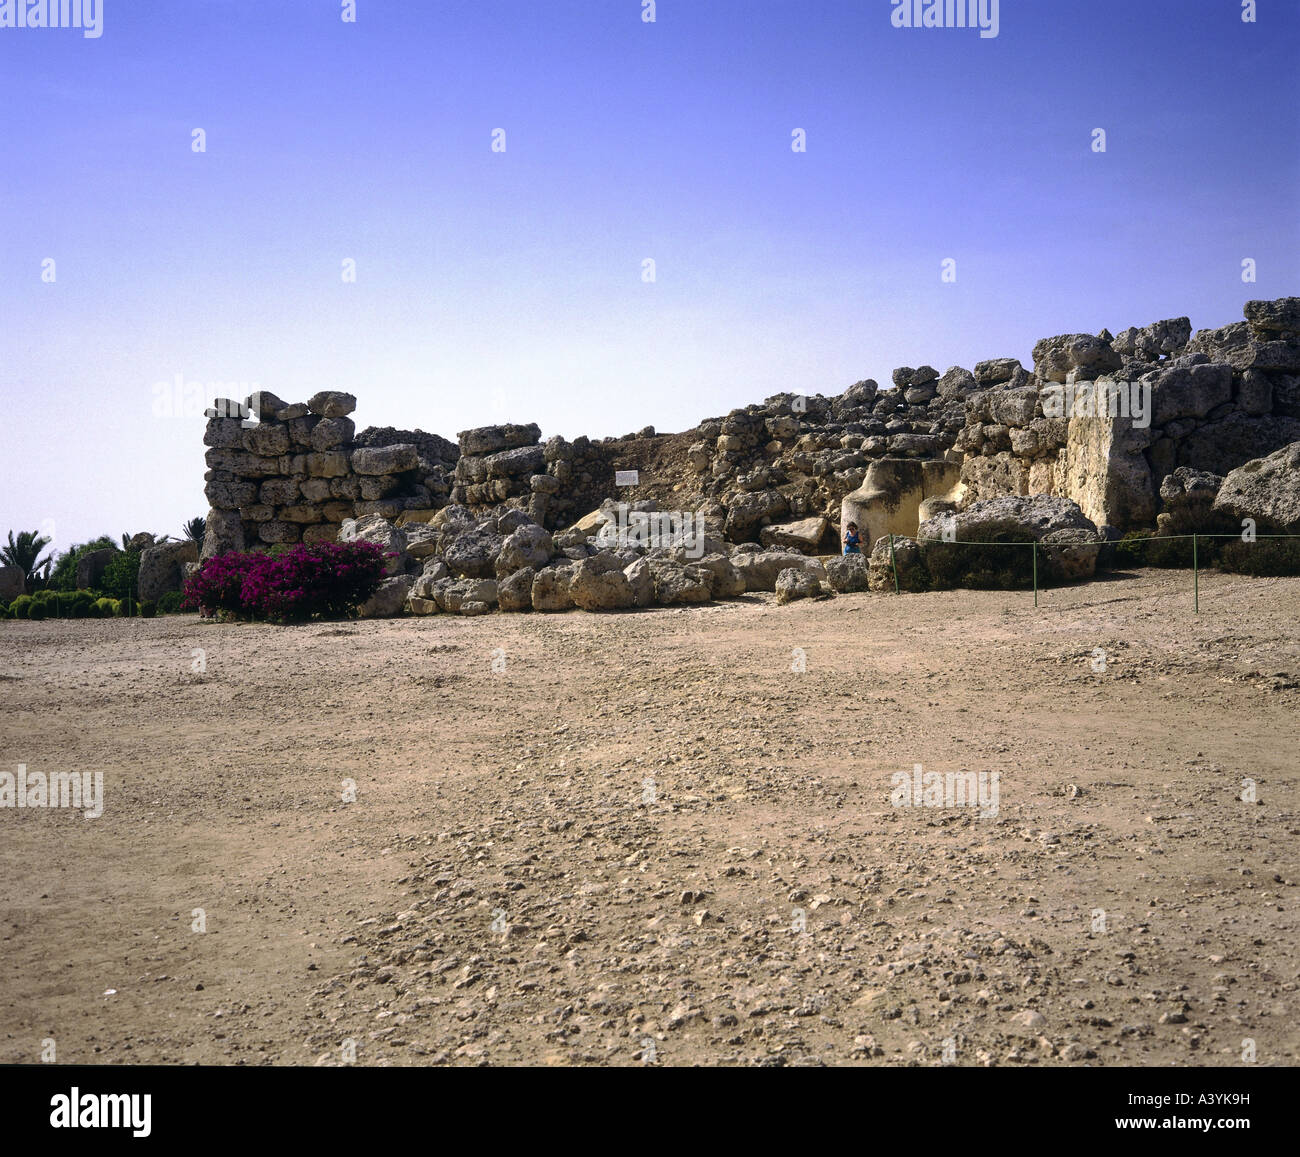 travel /geography, Malta, Gozo, buildings, Ggantija double temple, forecourt, facade, circa 3800 - 3600 B.C., historic, historical, Europe, architecture, early history, prehistory, megalith, megaliths, culture, religion, wall, UNESCO world heritage, Stock Photo